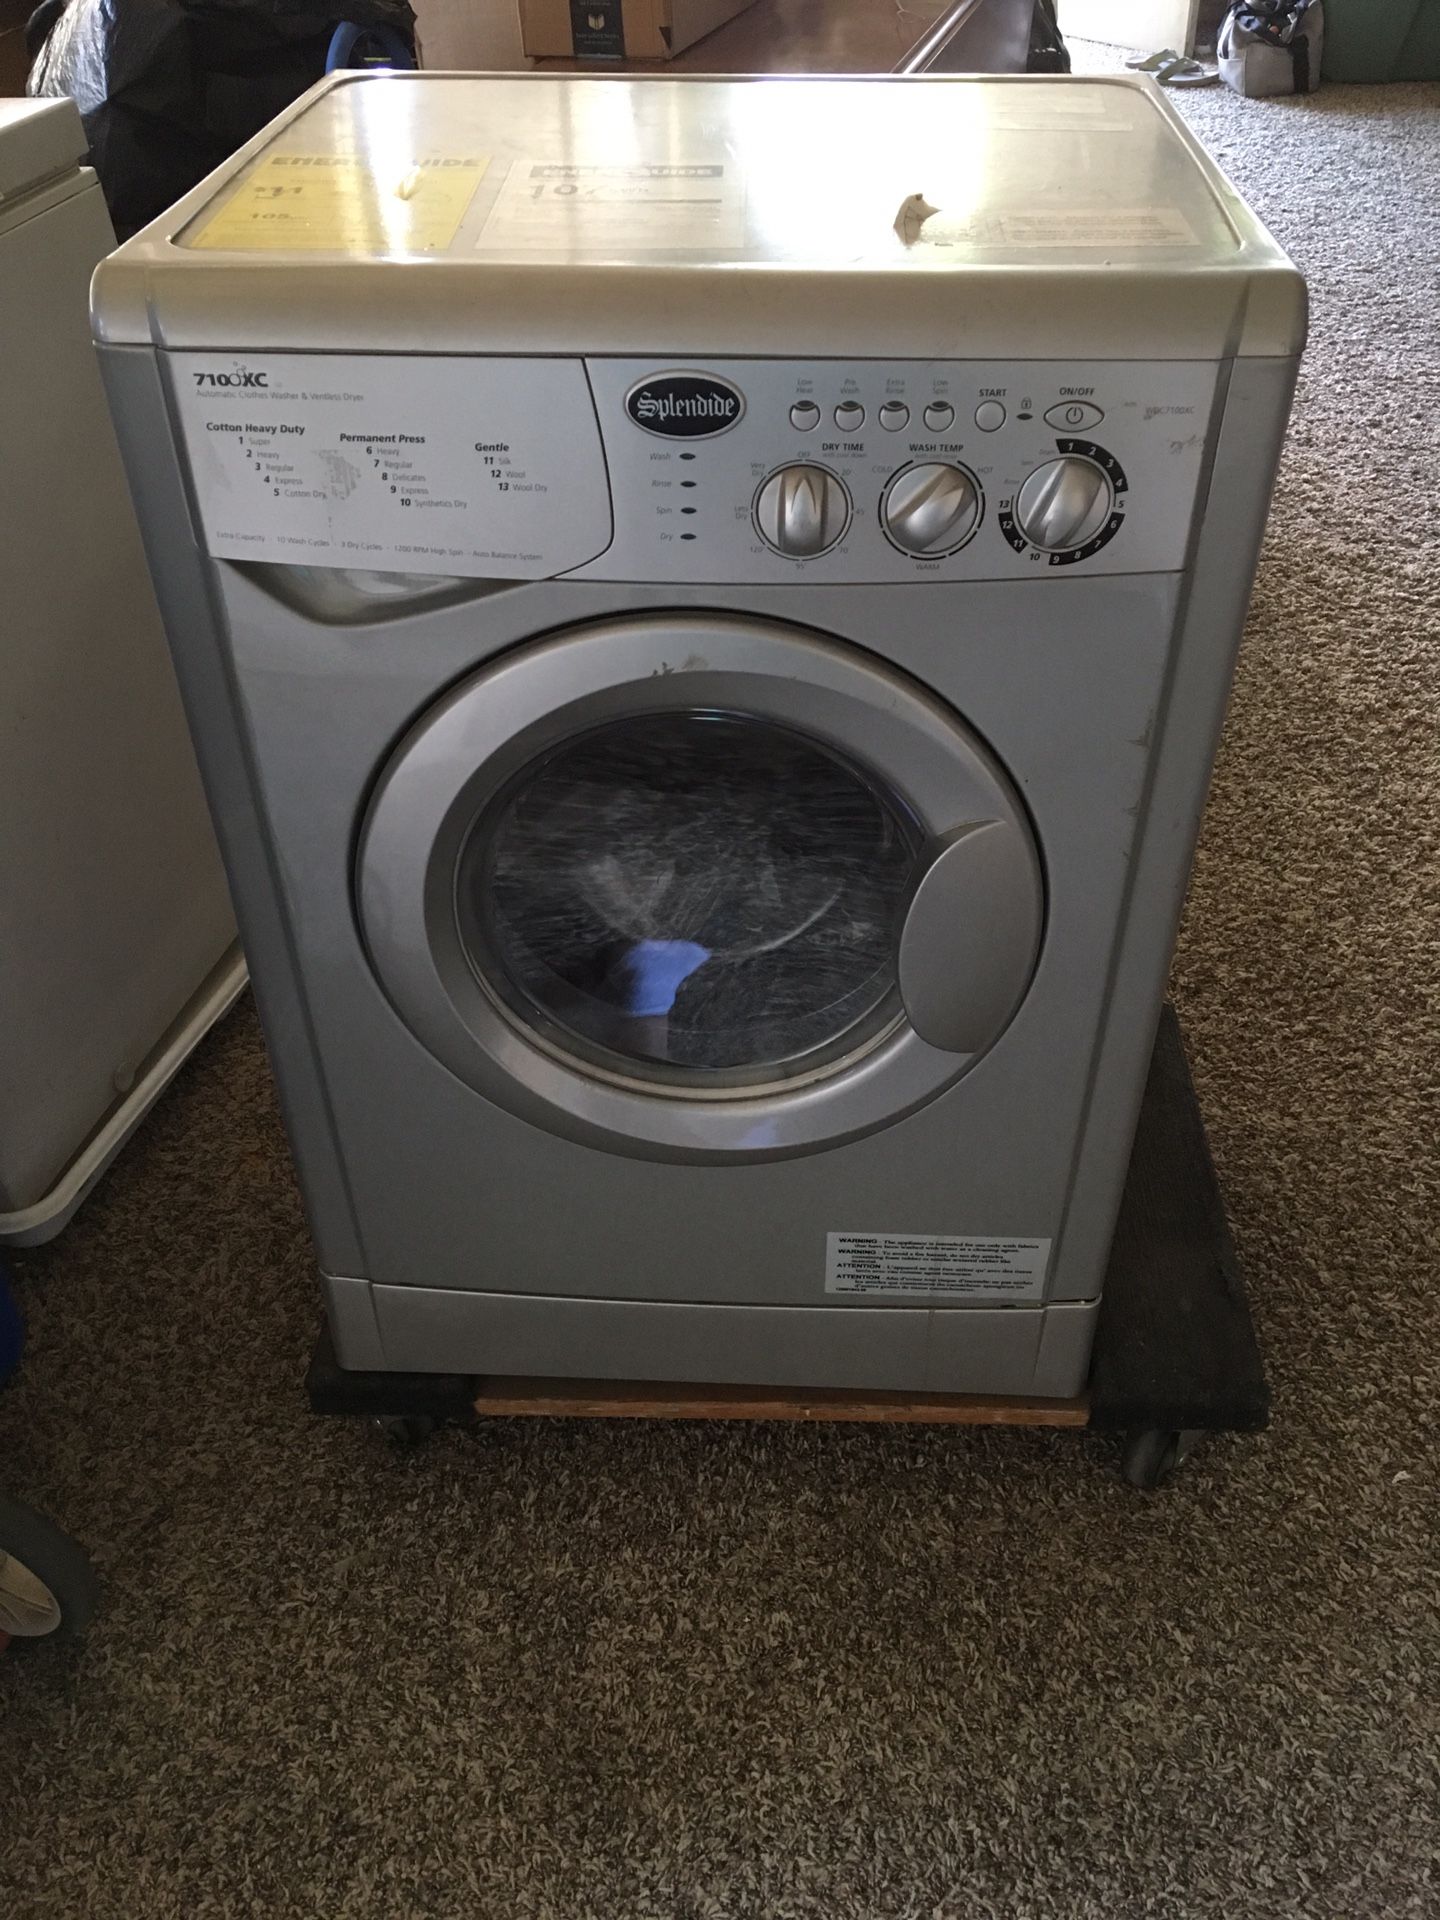 RV / Home washer dryer combo